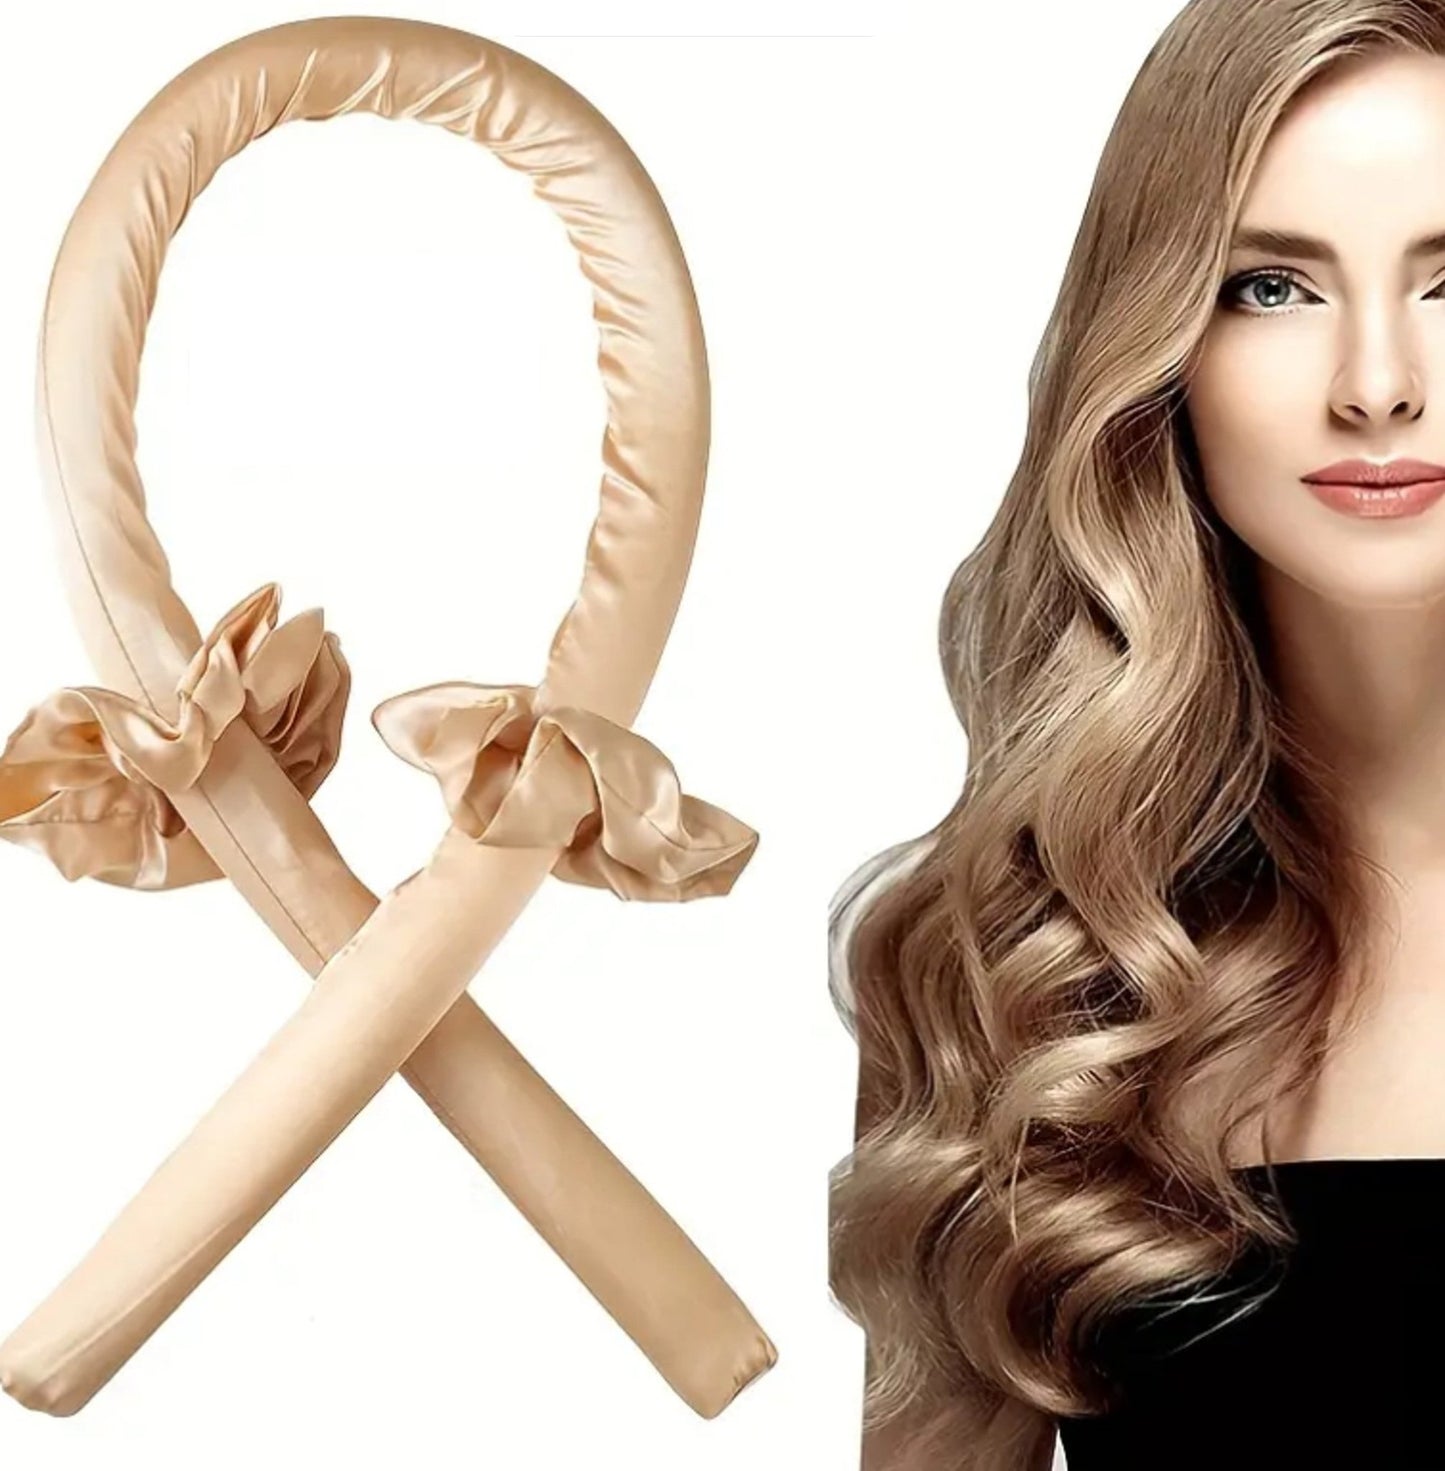 ADD ON + (Satin Hair Curler) - Pretty Gifted Online